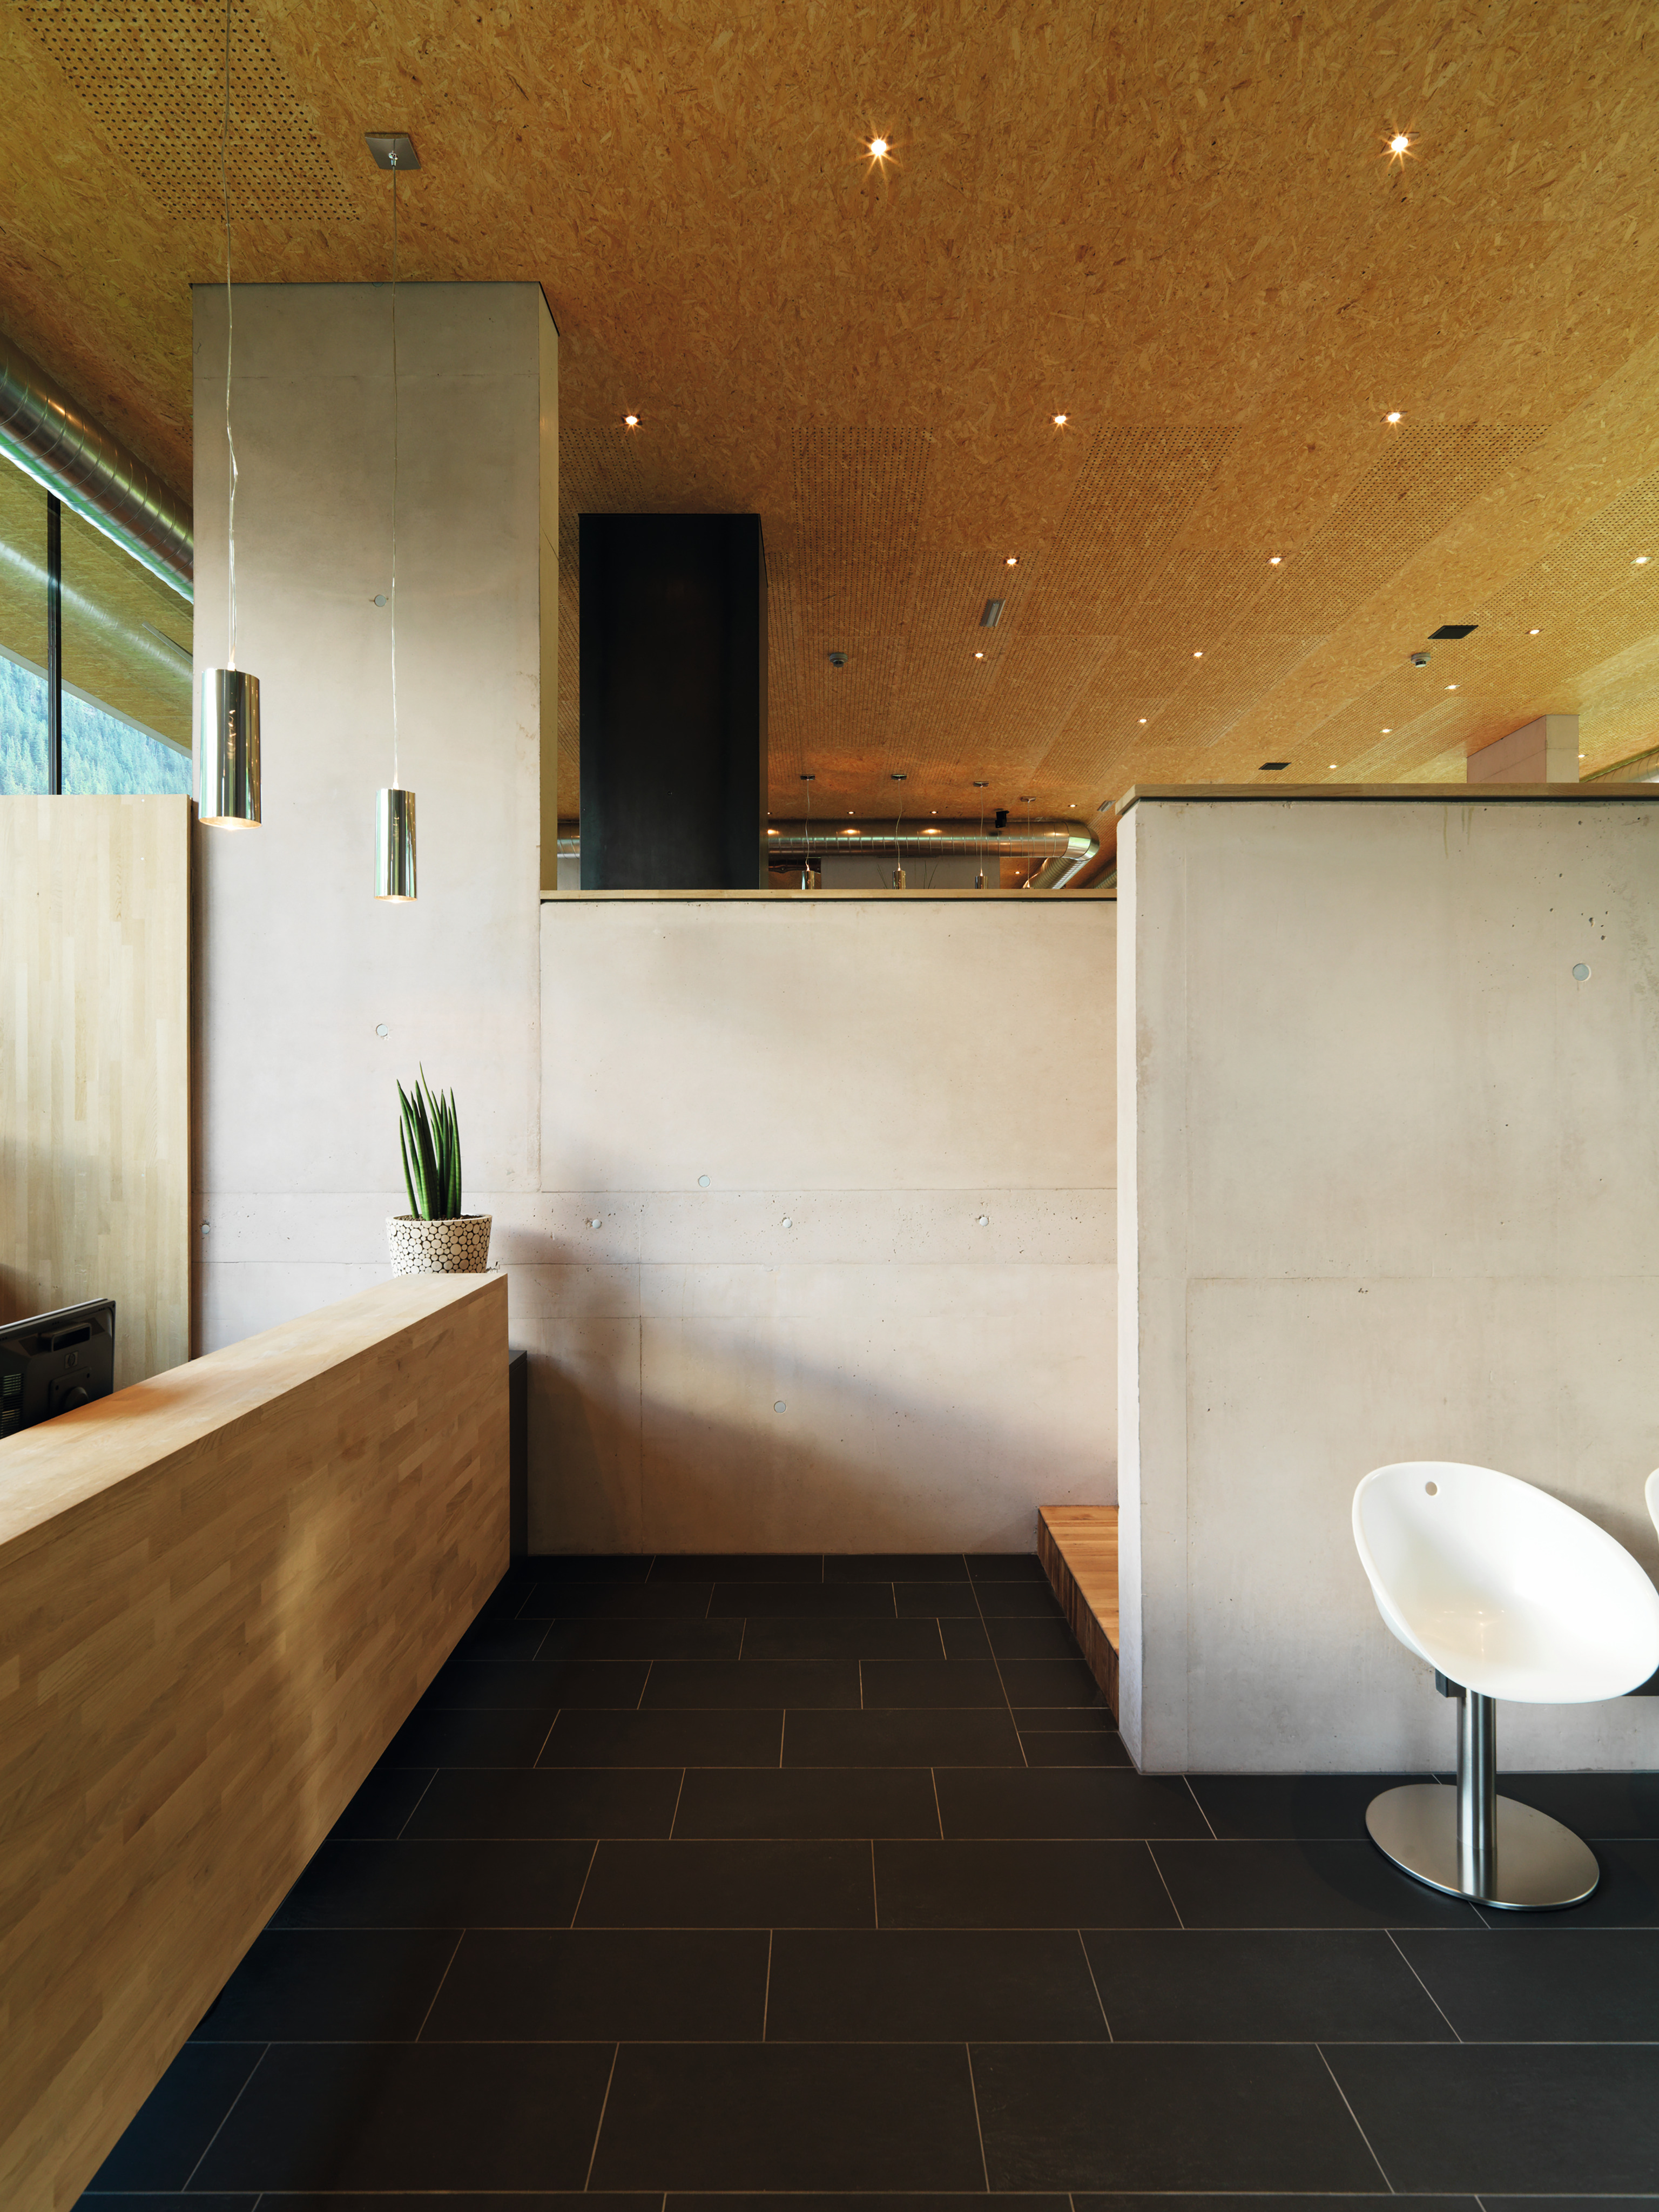 On the interior, the OSB boards were used as acoustically effective elements.